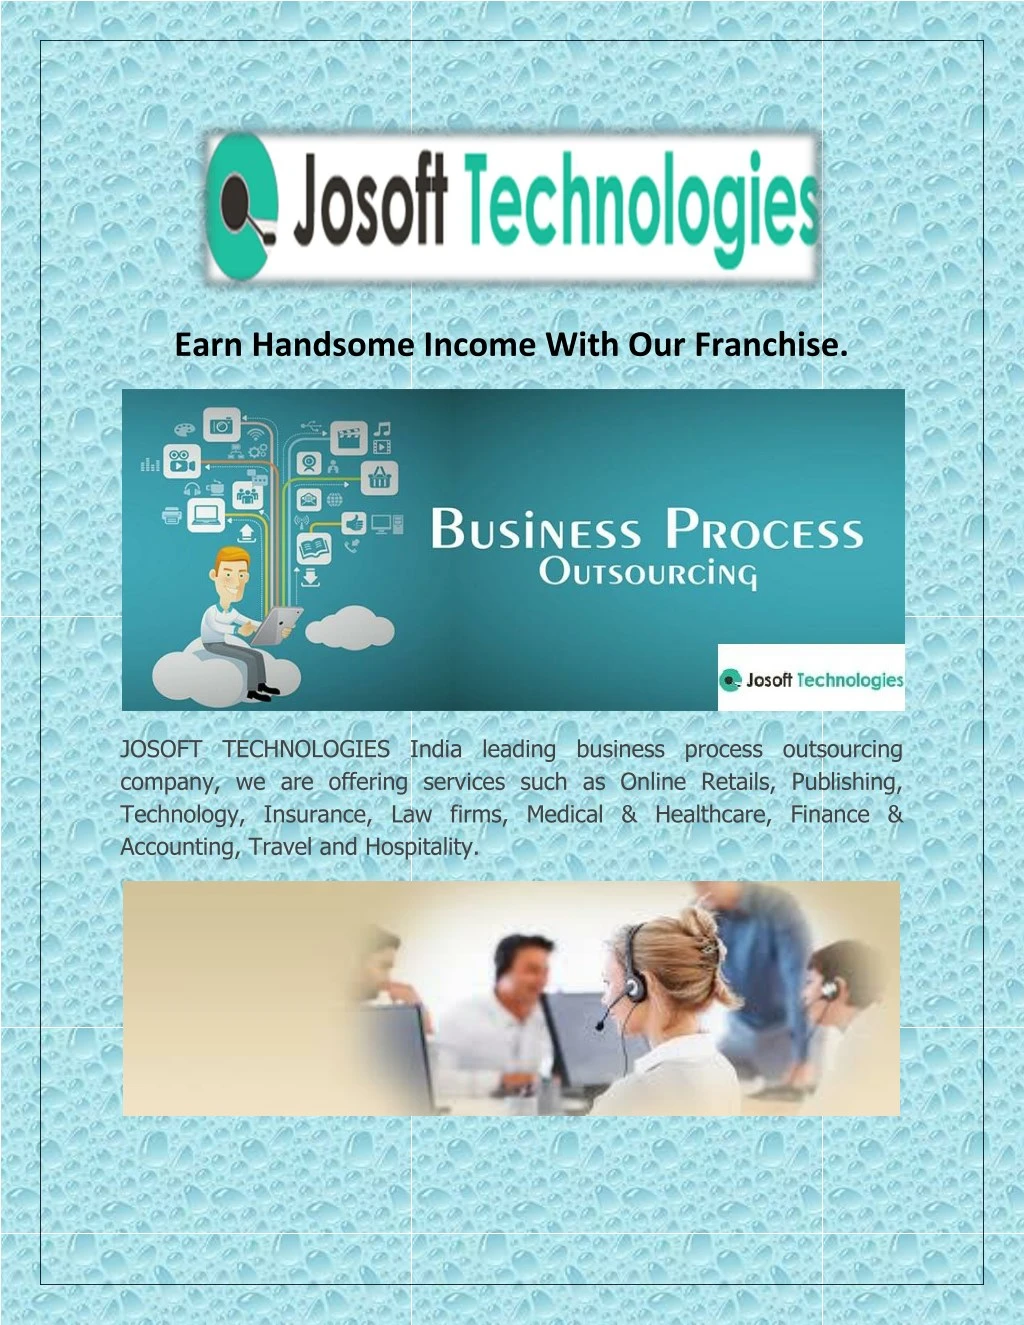 earn handsome income with our franchise